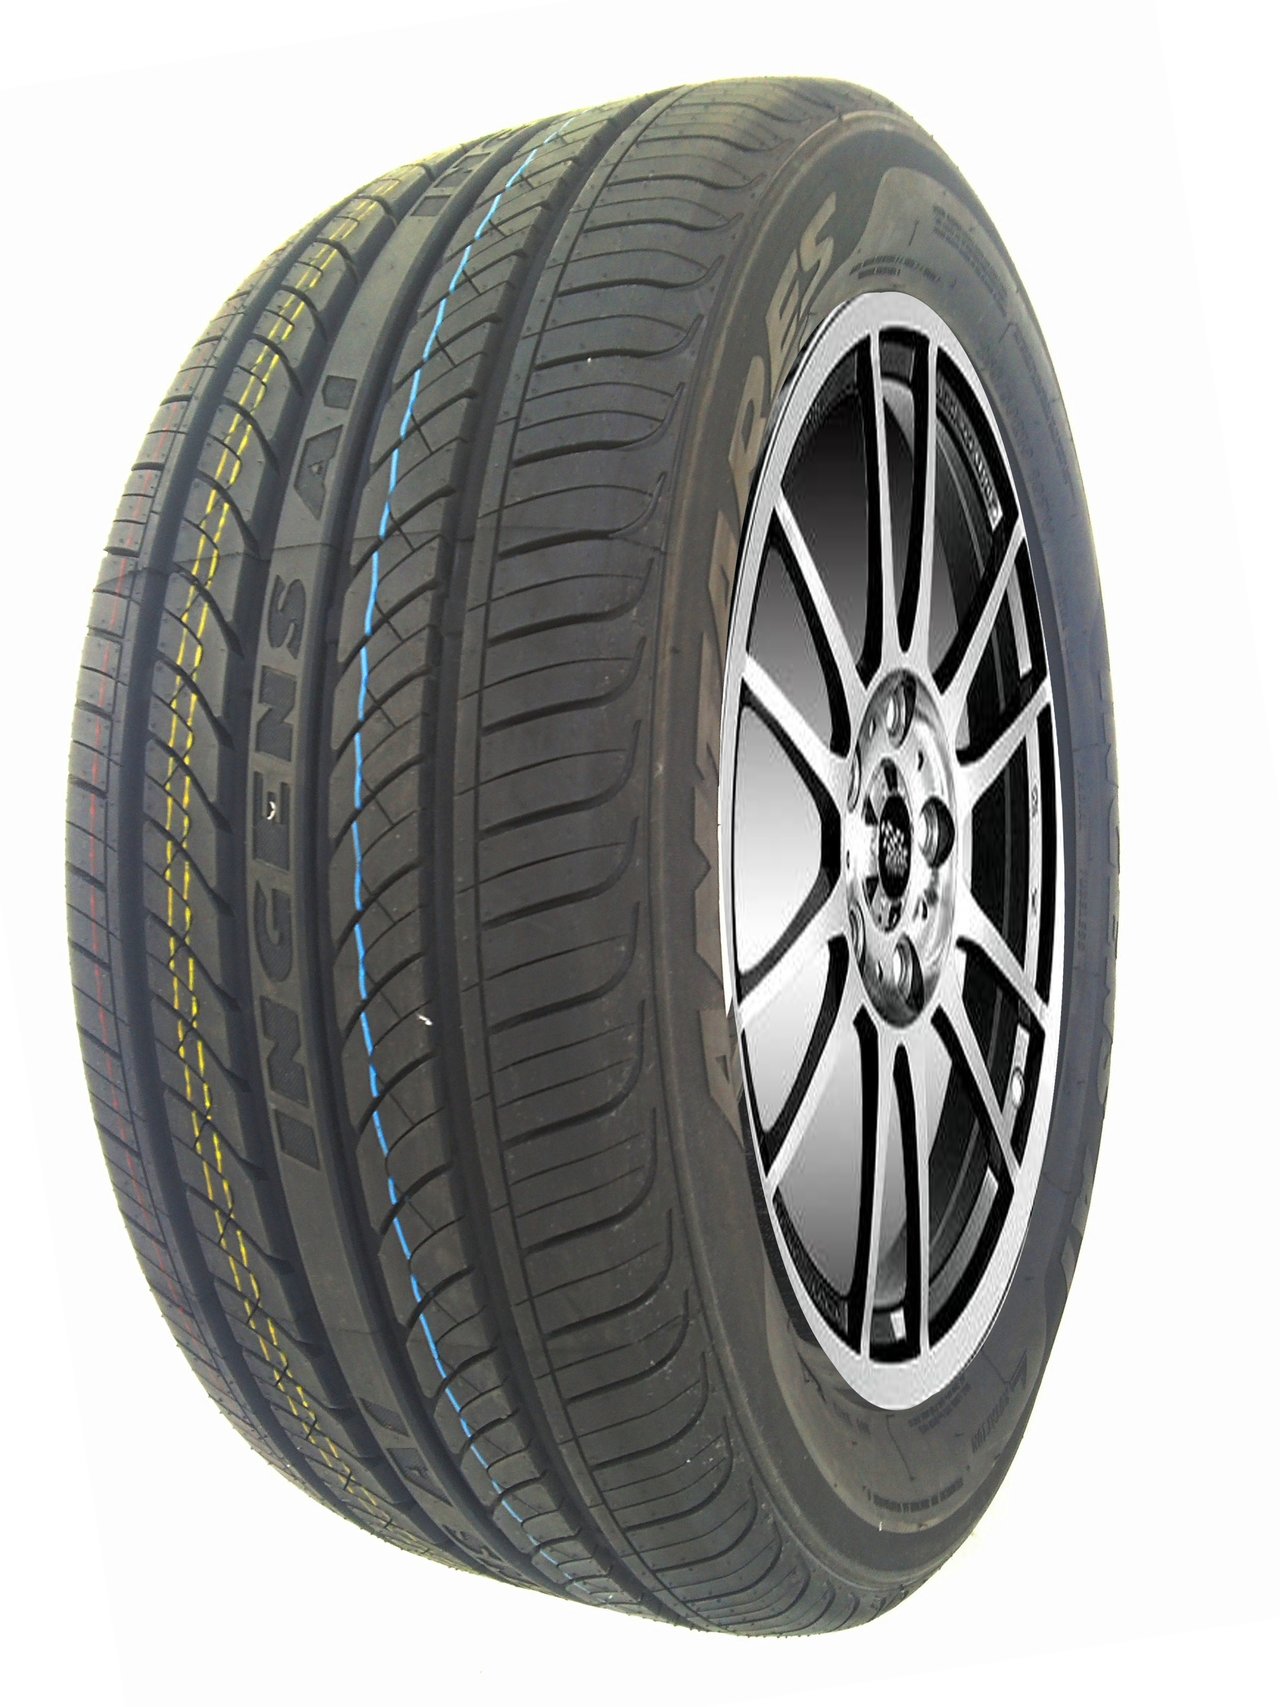 Antares Ingens A1 185/65R14 86H TL M+S